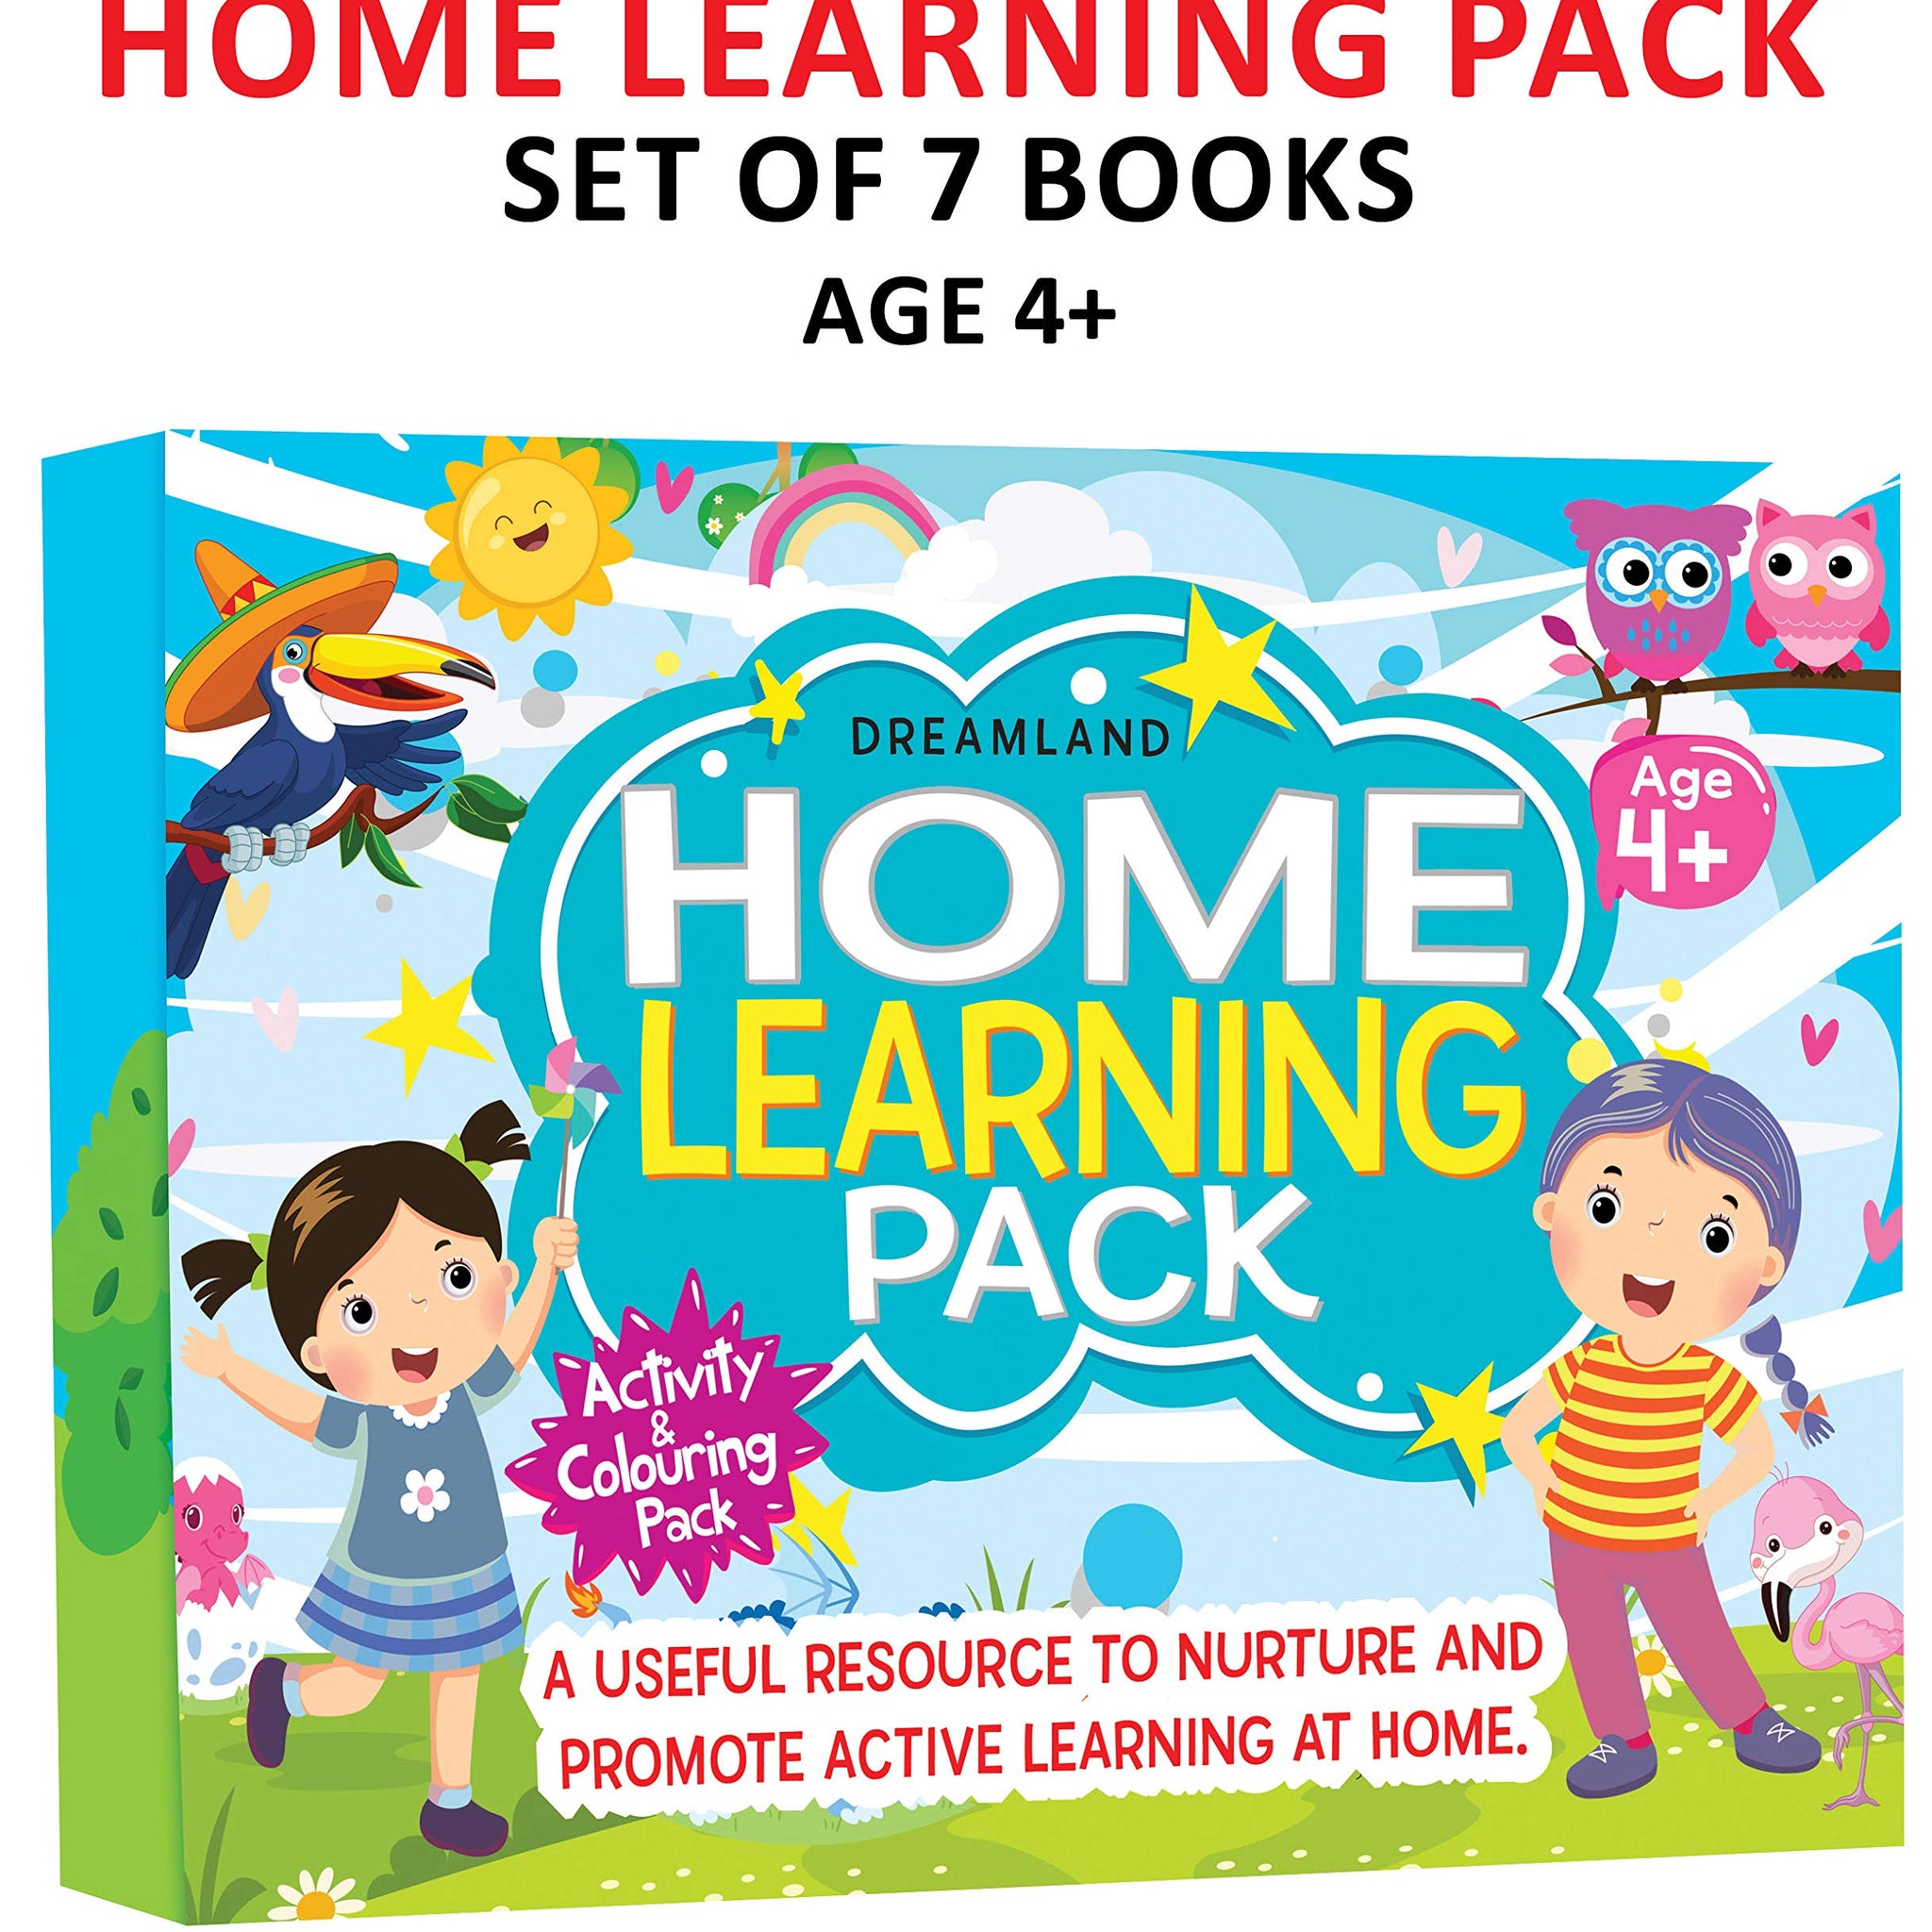 An Amazing Set of Home Learning Books For Kids Age 4+ (Pack of 7)